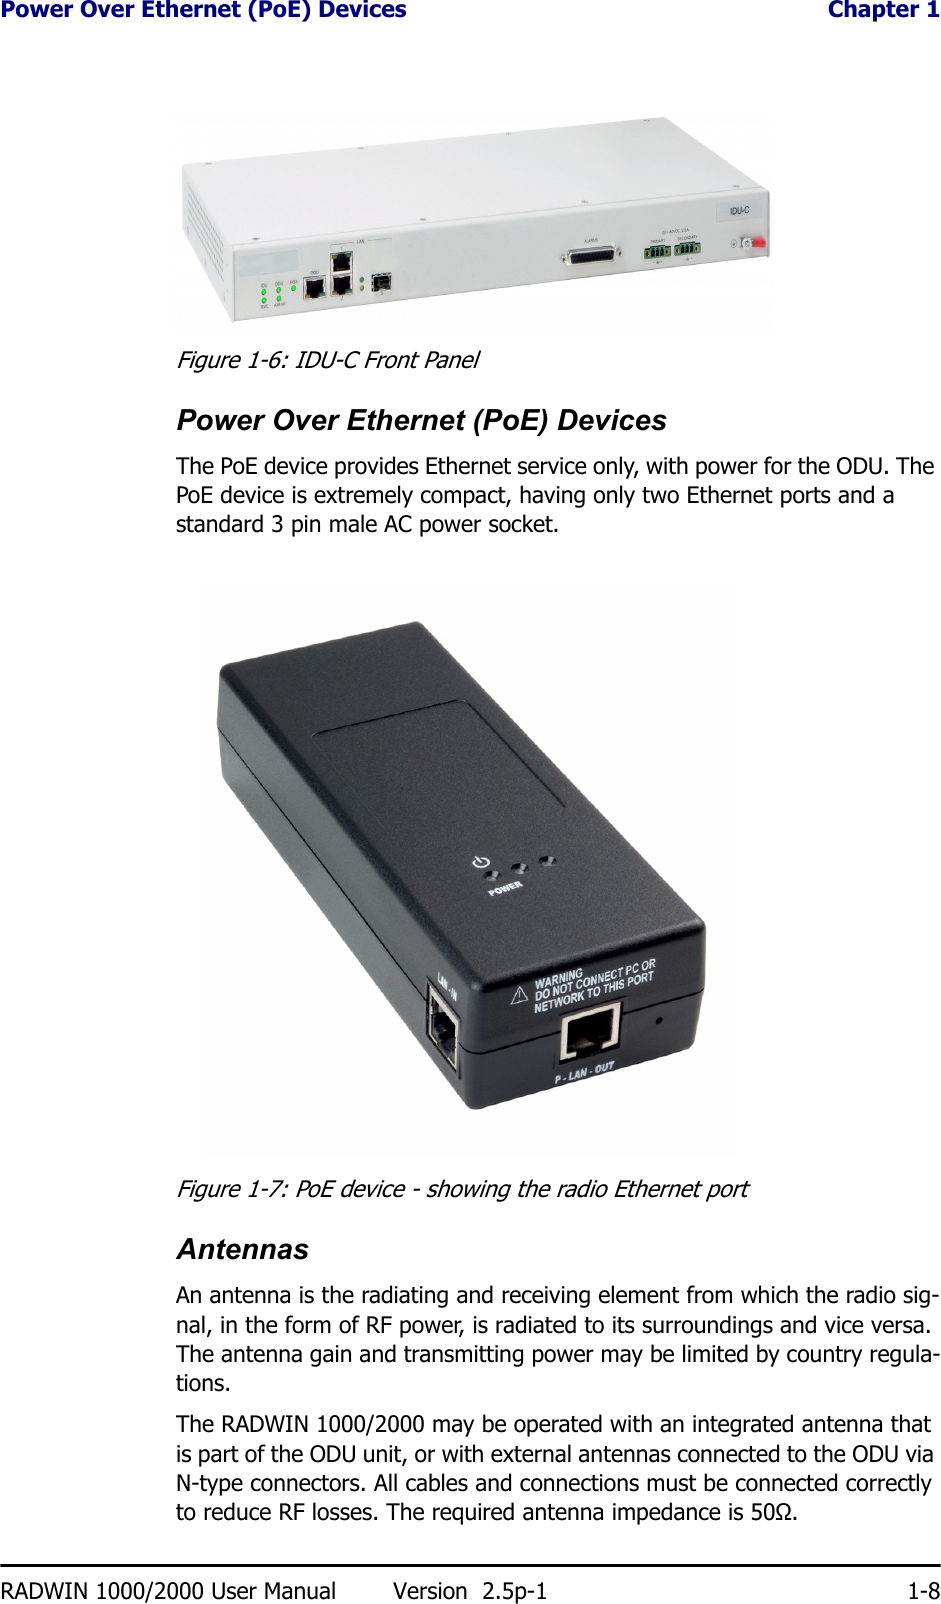 Power Over Ethernet (PoE) Devices  Chapter 1RADWIN 1000/2000 User Manual Version  2.5p-1 1-8Figure 1-6: IDU-C Front PanelPower Over Ethernet (PoE) DevicesThe PoE device provides Ethernet service only, with power for the ODU. The PoE device is extremely compact, having only two Ethernet ports and a standard 3 pin male AC power socket.Figure 1-7: PoE device - showing the radio Ethernet portAntennasAn antenna is the radiating and receiving element from which the radio sig-nal, in the form of RF power, is radiated to its surroundings and vice versa. The antenna gain and transmitting power may be limited by country regula-tions.The RADWIN 1000/2000 may be operated with an integrated antenna that is part of the ODU unit, or with external antennas connected to the ODU via N-type connectors. All cables and connections must be connected correctly to reduce RF losses. The required antenna impedance is 50Ω.